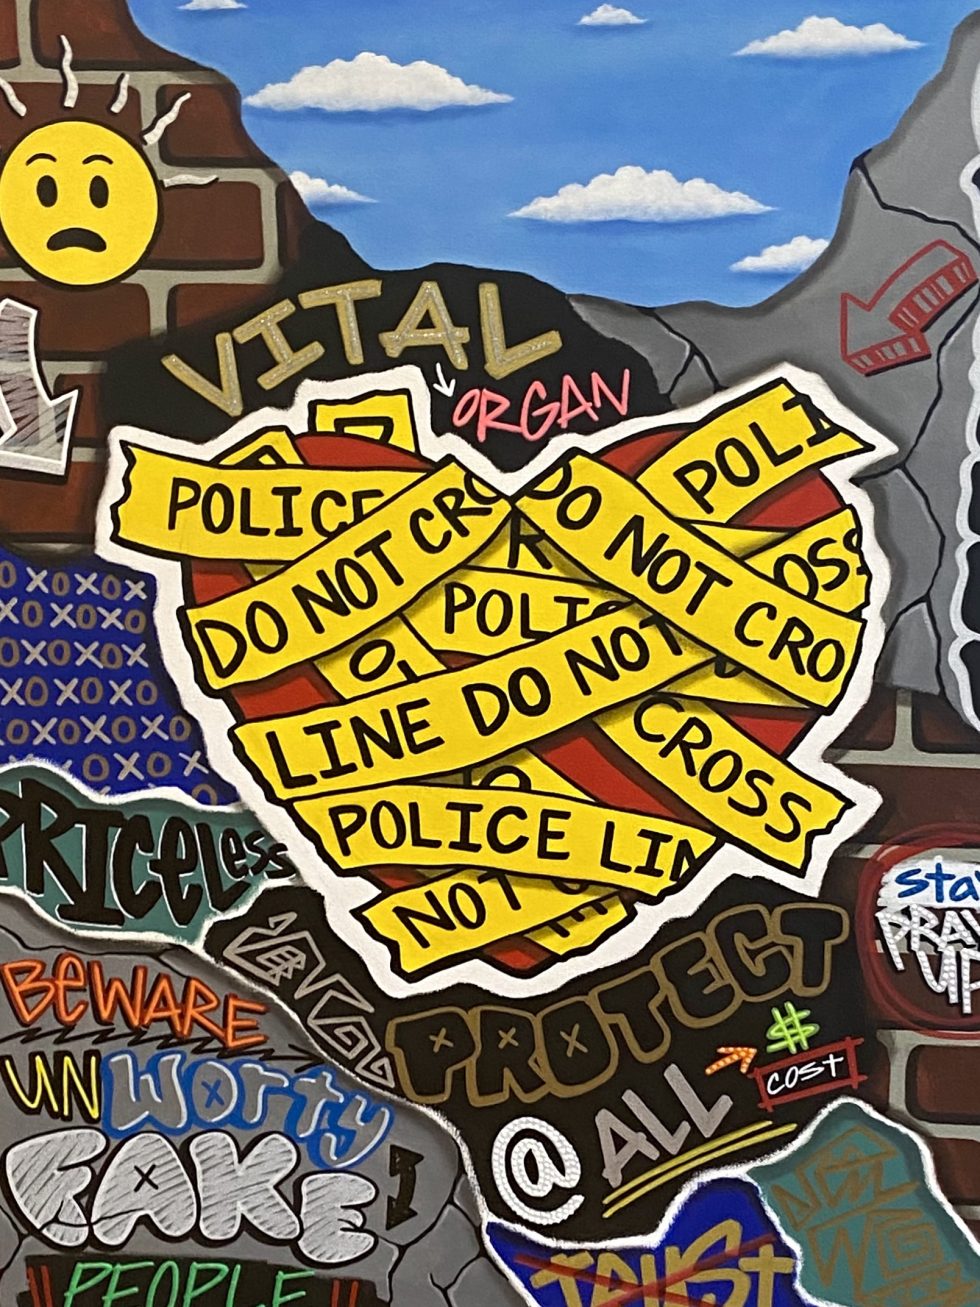 A red emoji heart wrapped with caution type tape that says Do Not Cross Police. The surrounding area has a brick wall, typography with the words priceless, protect at all cost, beware unworthy fake people, vital organ, and the word trust crossed out. There is a shocked upset emoji face in the left top corner.